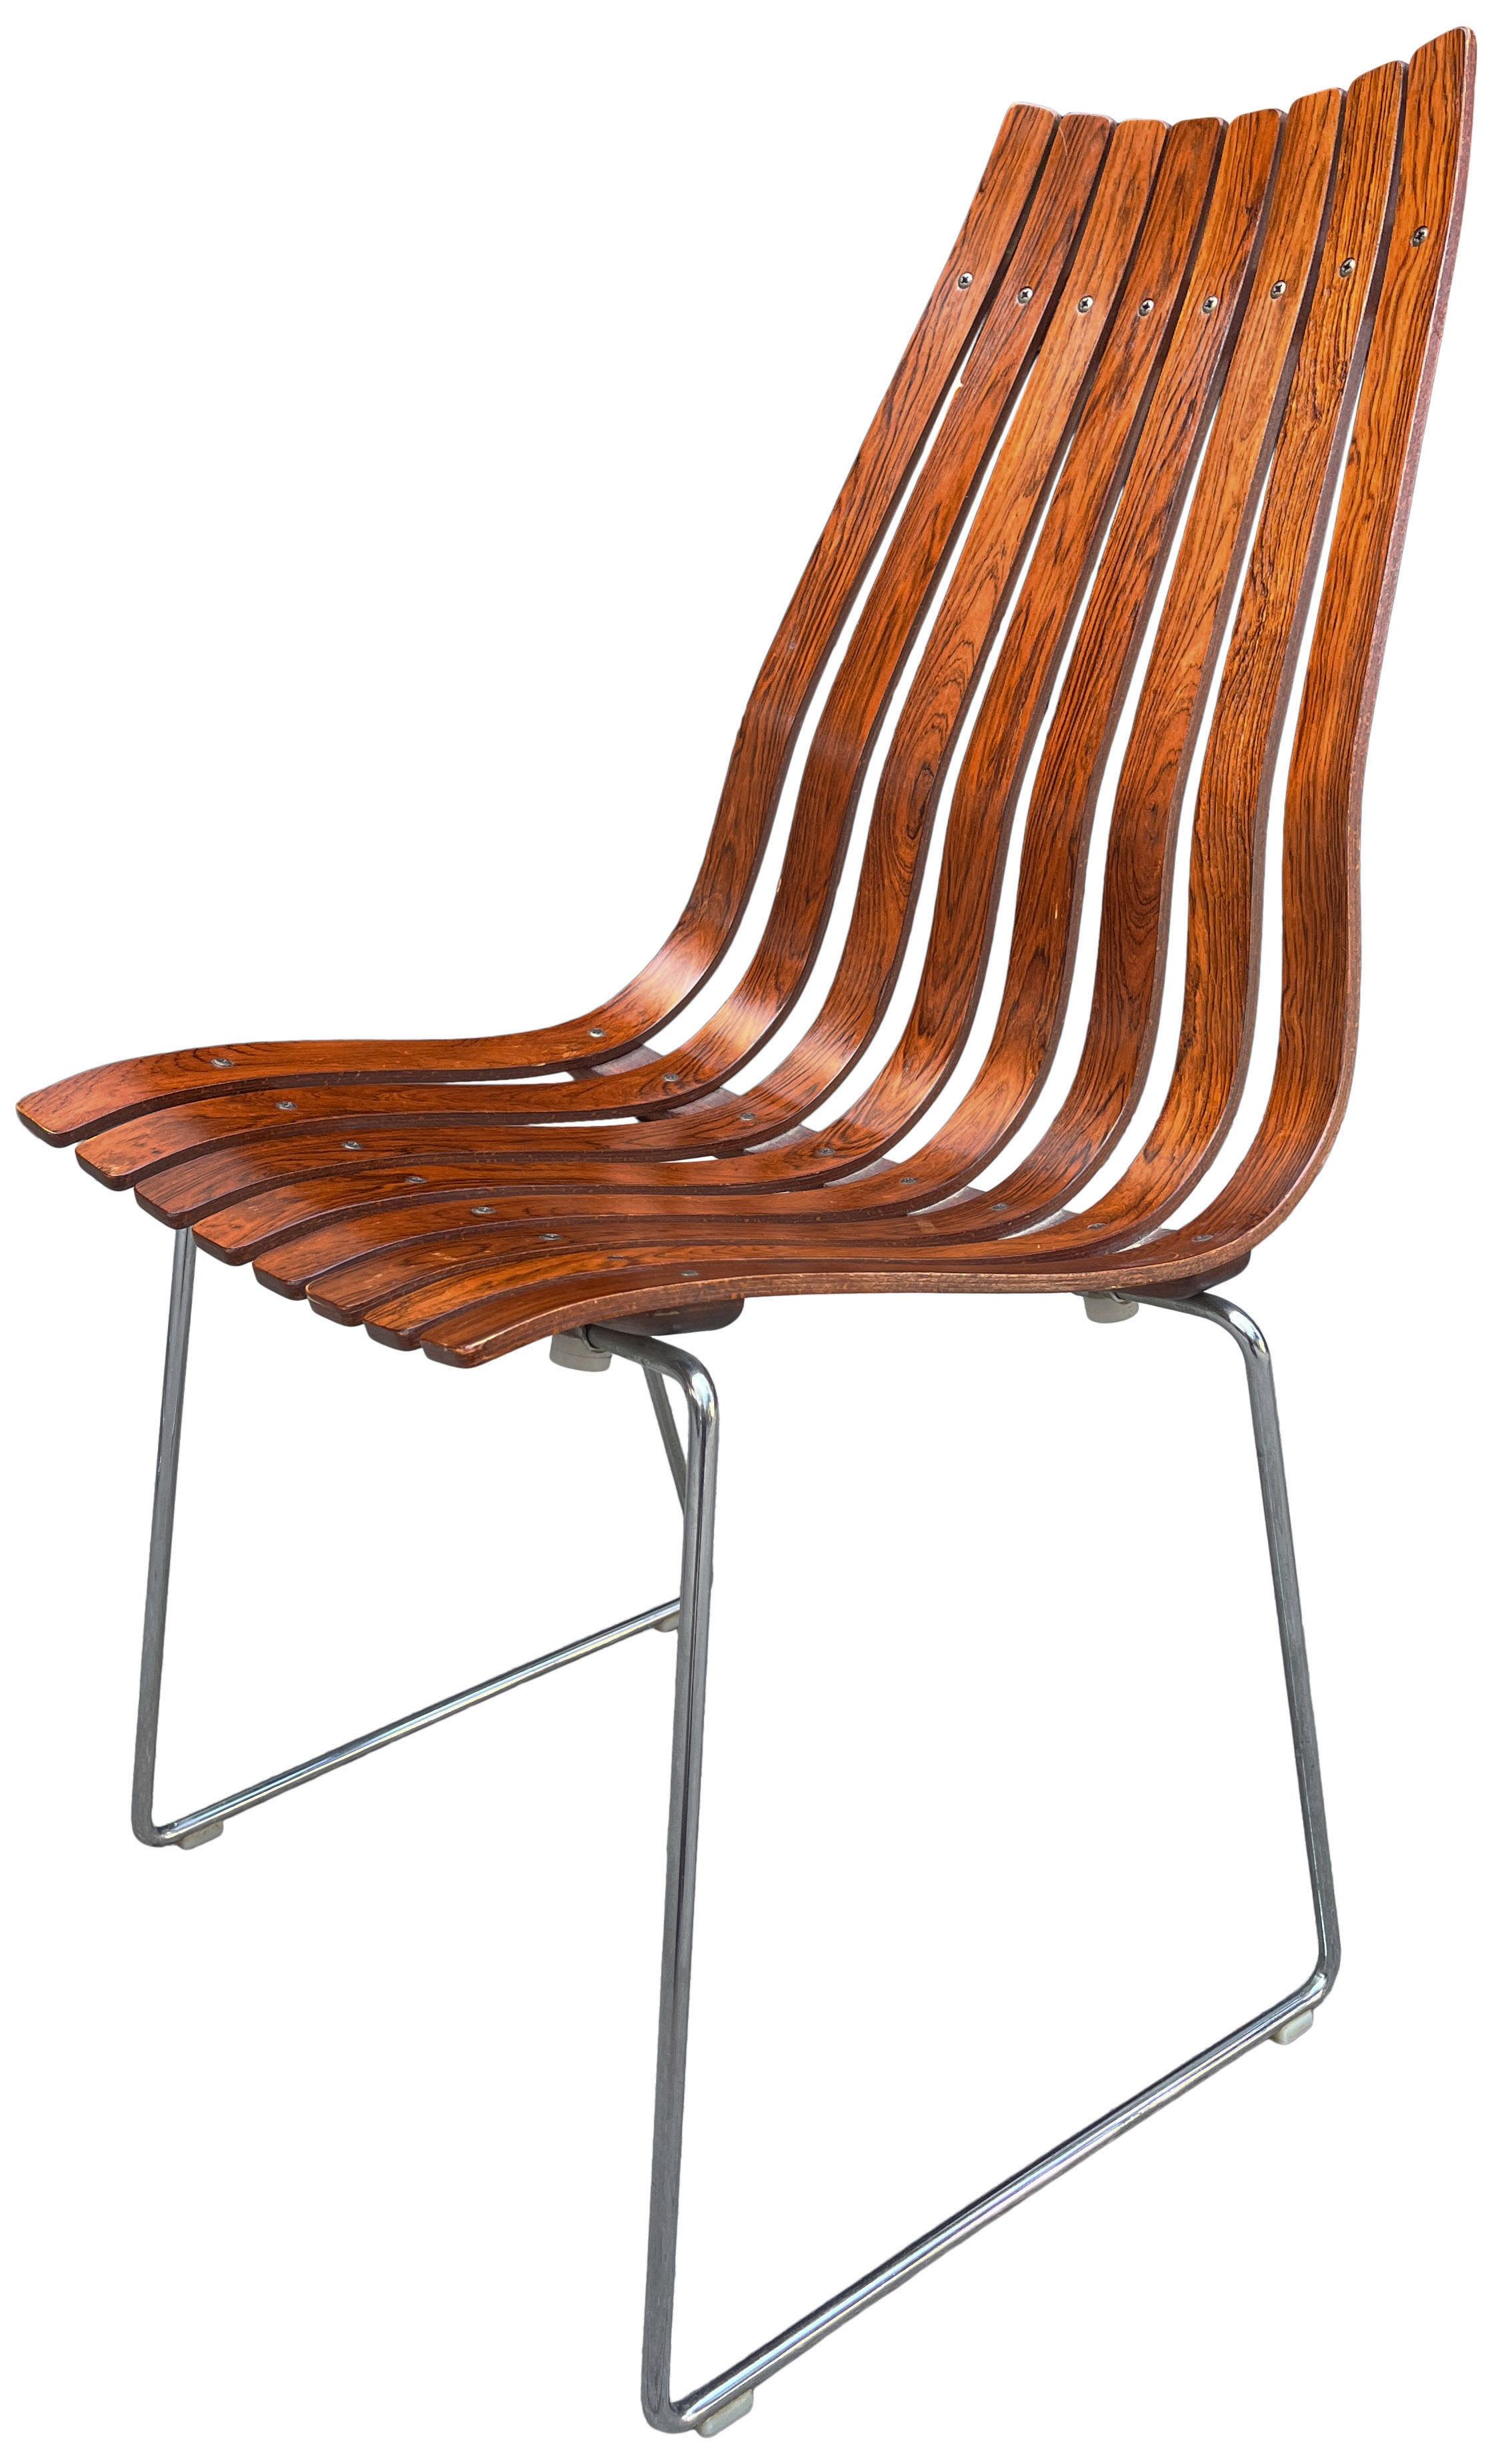 Midcentury Scandia Chairs by Hans Brattrud for Hove Mobler For Sale 3